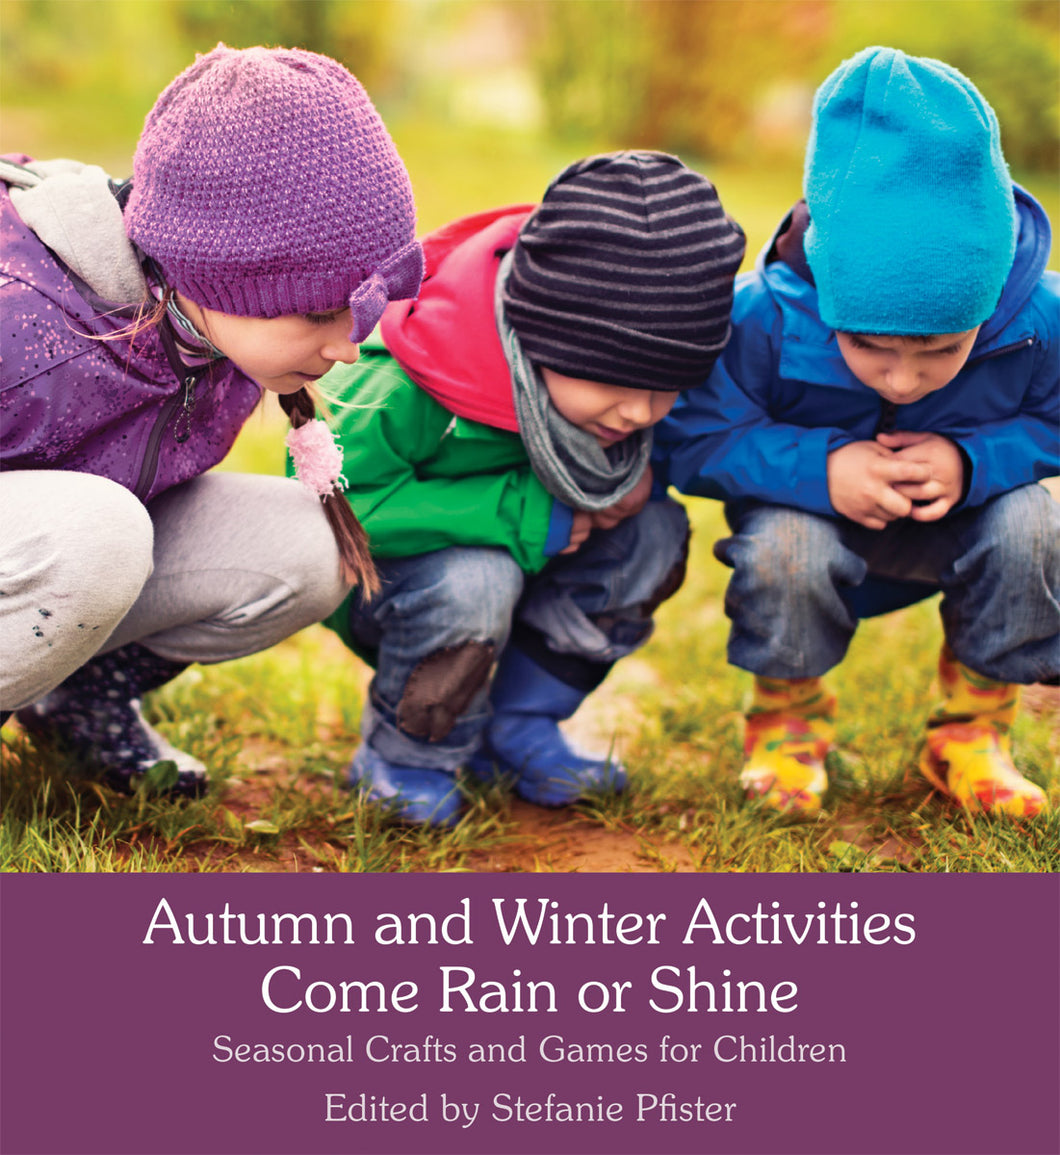 <i>Autumn and Winter Activities Come Rain or Shine: Seasonal Crafts and Games for Children</i> by Stefanie Pfister